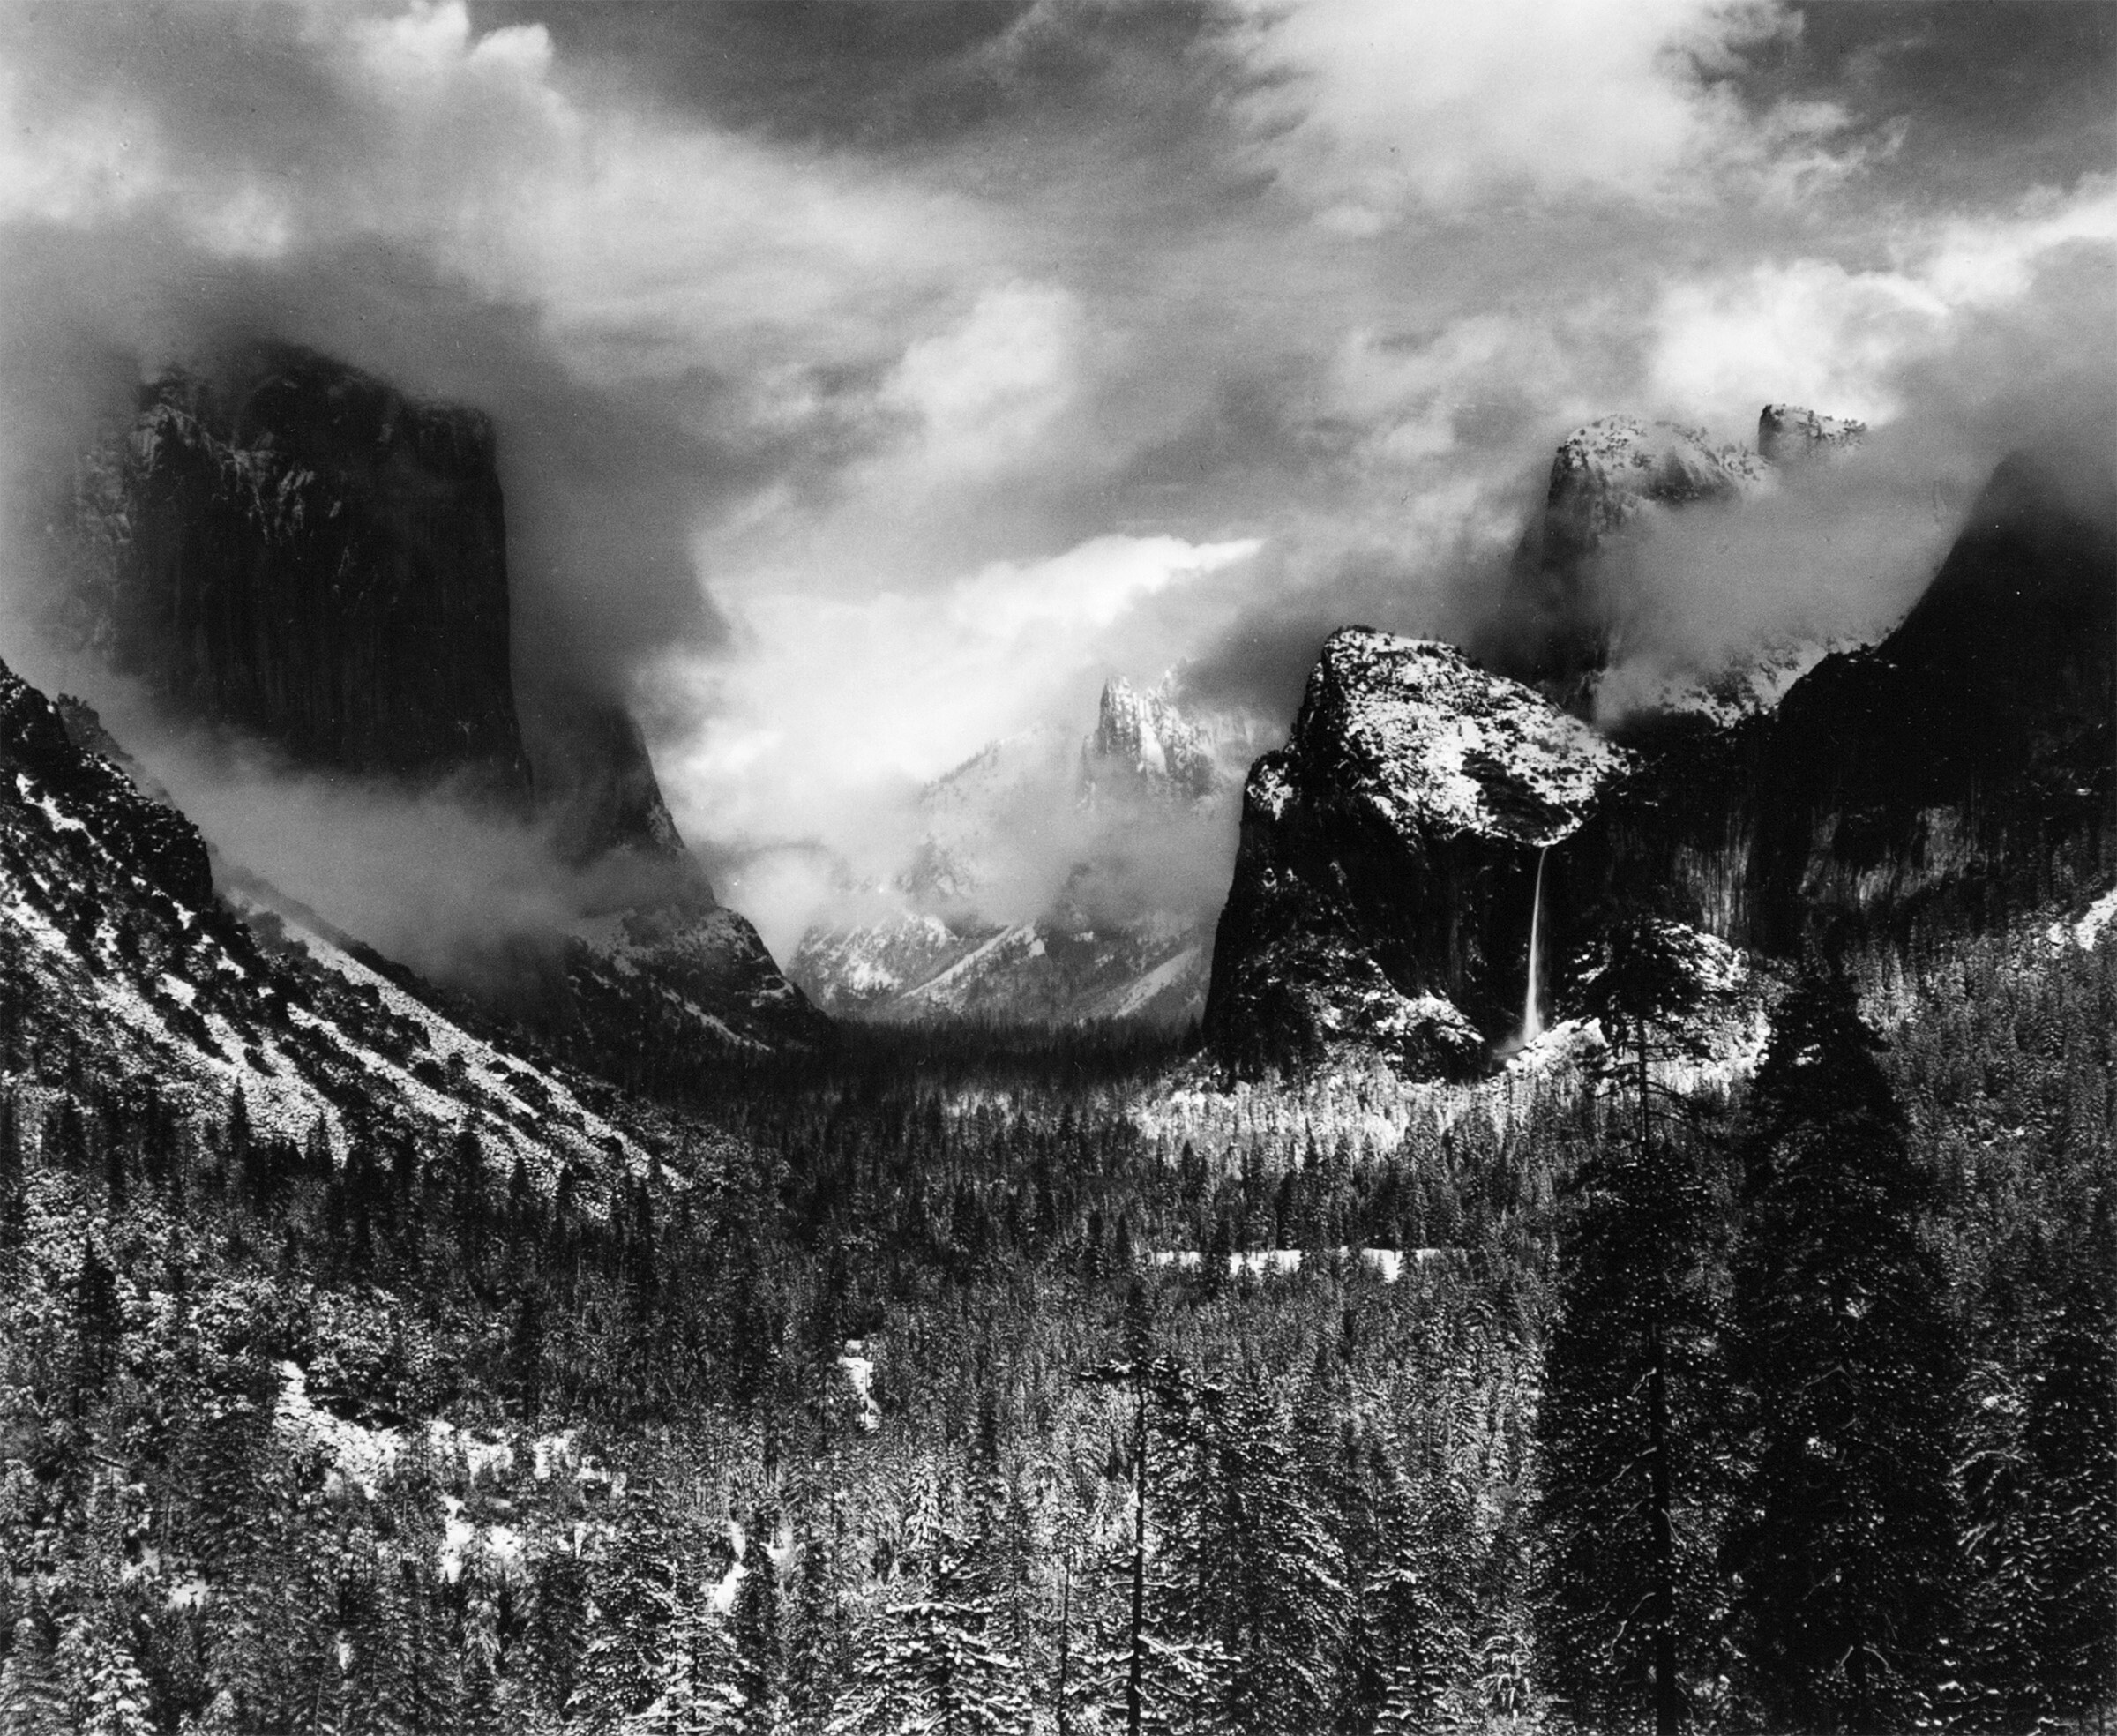 Ansel Adams, "Winter Storm," 1940, Silver gelatin print, 7 3/8 × 9 in. (18.7 × 22.9 cm), Private Collection, L.2016.8.9LTL